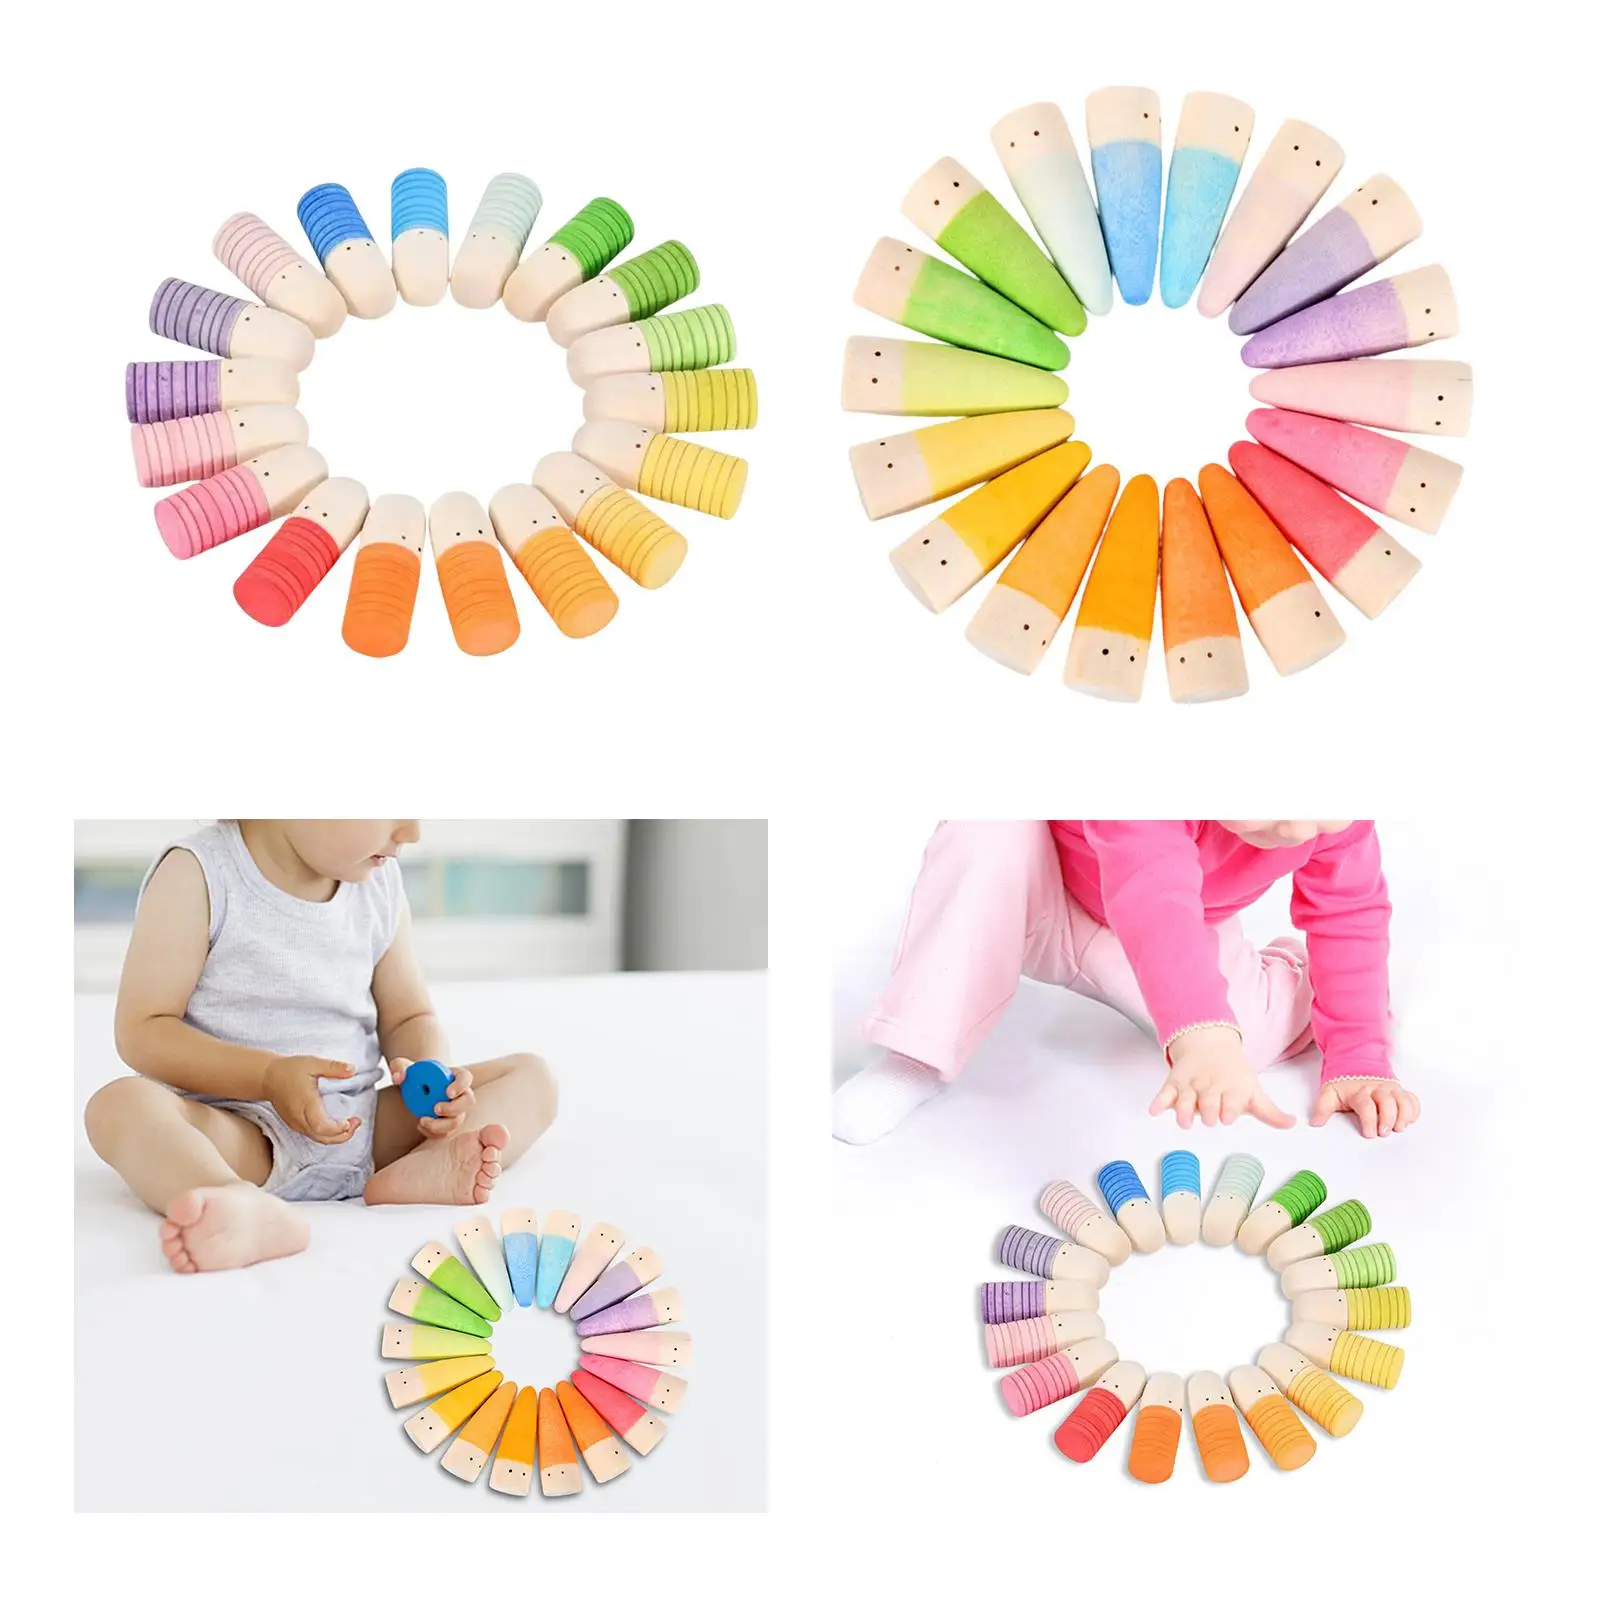 18x Rainbow Peg Dolls for Toddlers Hand Eye Coordination for Children